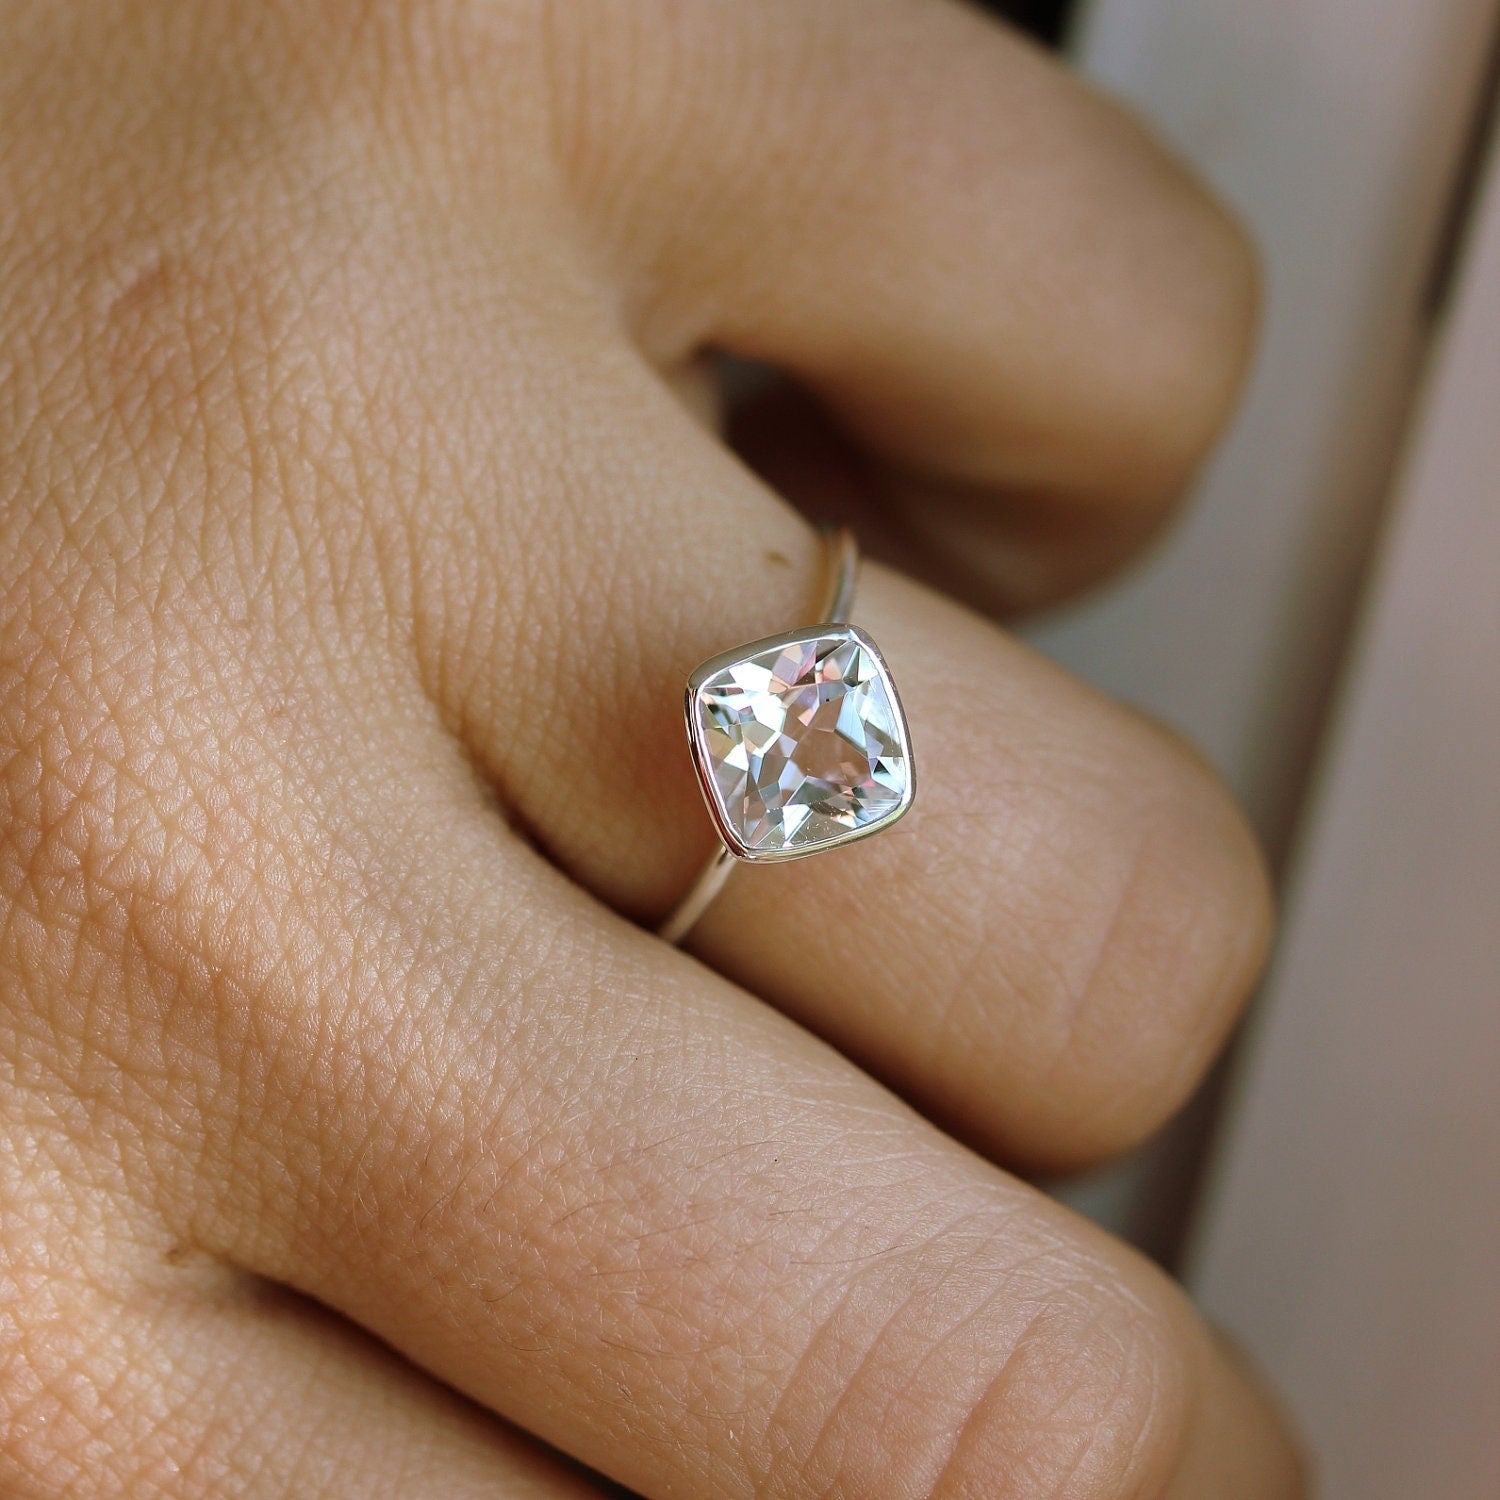 White Topaz Rings For Women | Wedding Bands Company Chicago